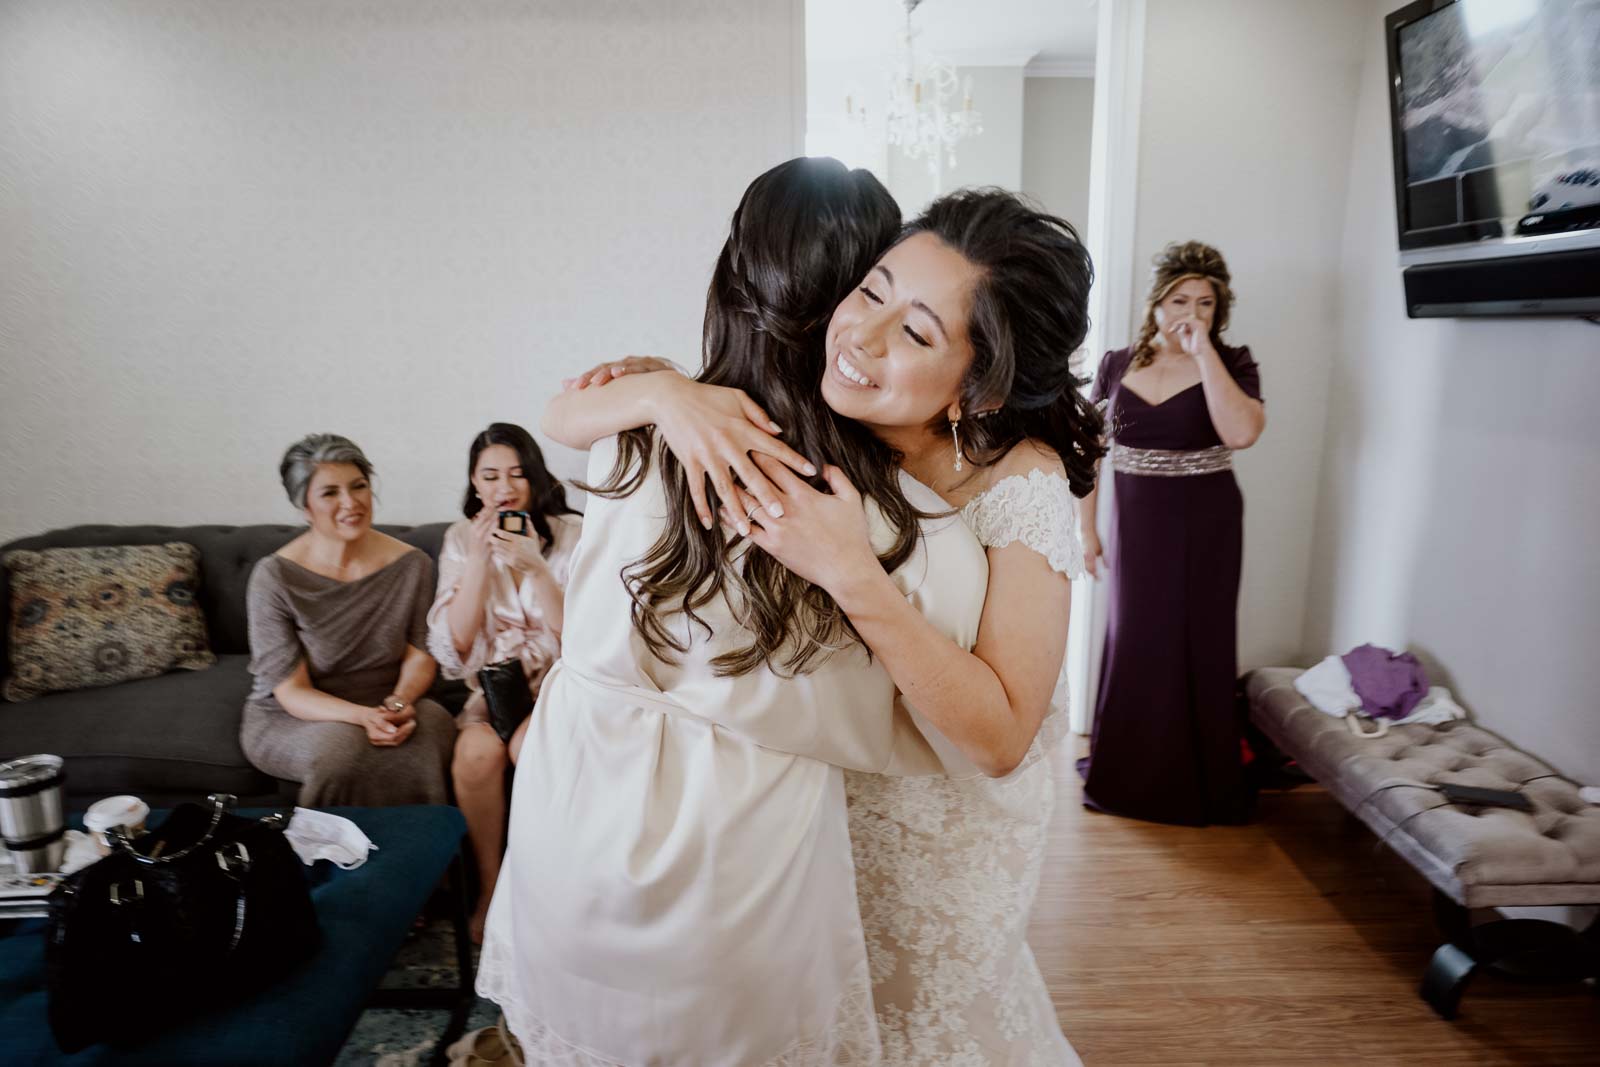 At Kendall point in Texas wedding venue the bride hugs her sister as her mother in law tears off in the background